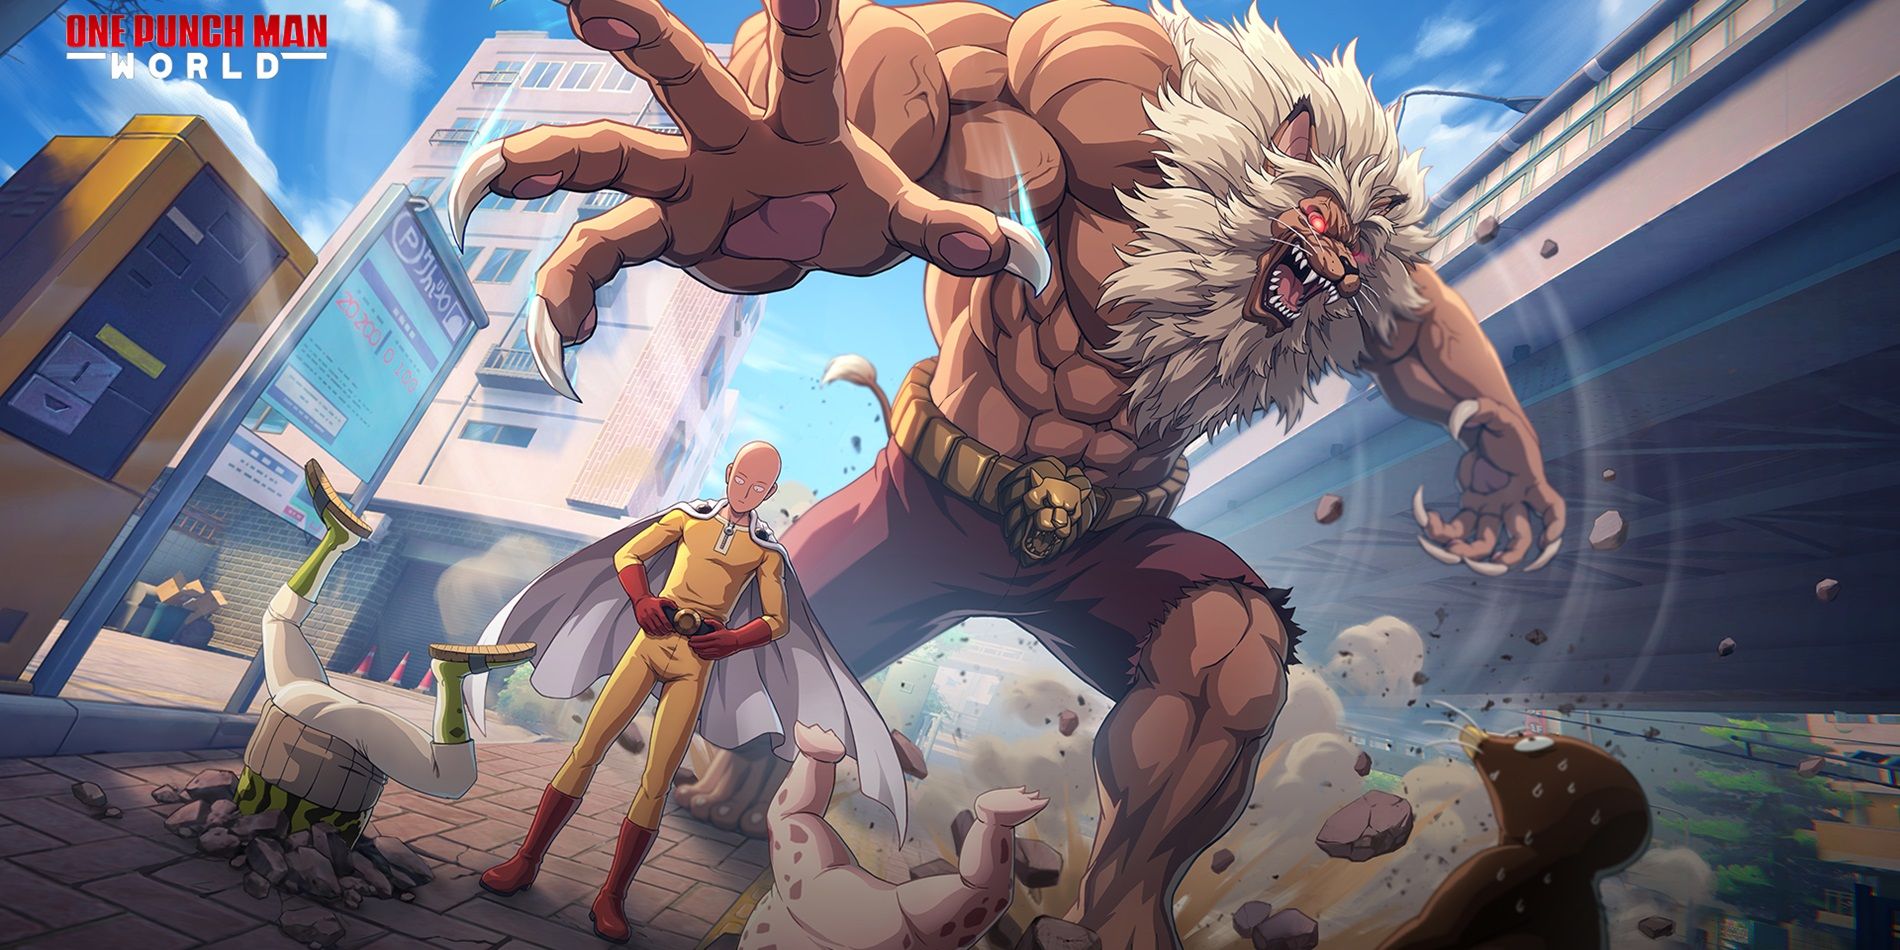 Official One Punch Man: World image featuring Saitama being attacked by Beast King